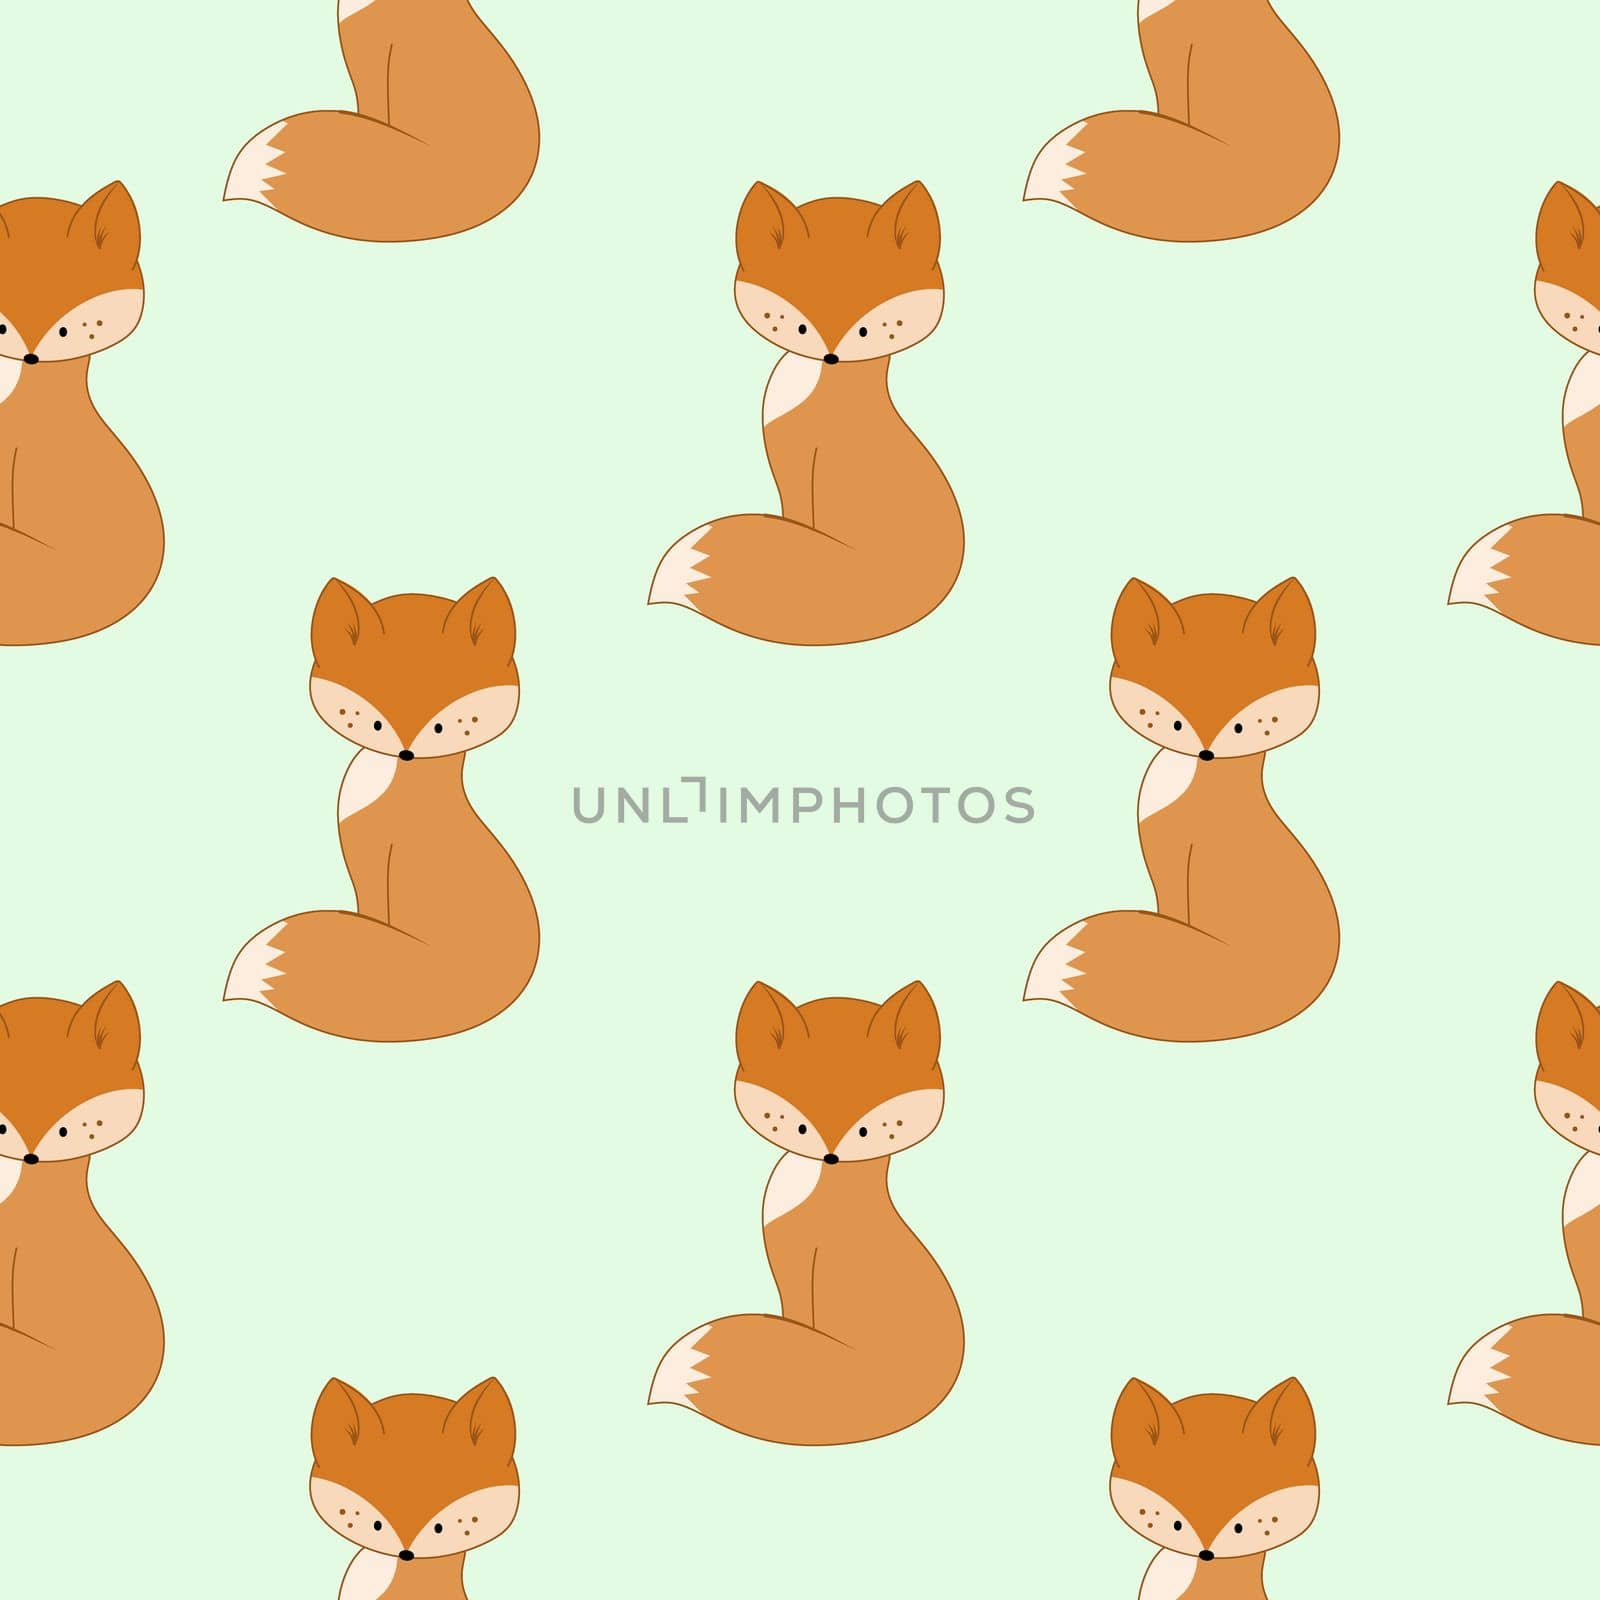 Cute cartoon Fox pattern on green background. Seamless endless background for print, cover, wrapping paper, tailoring. Children's vector illustration.